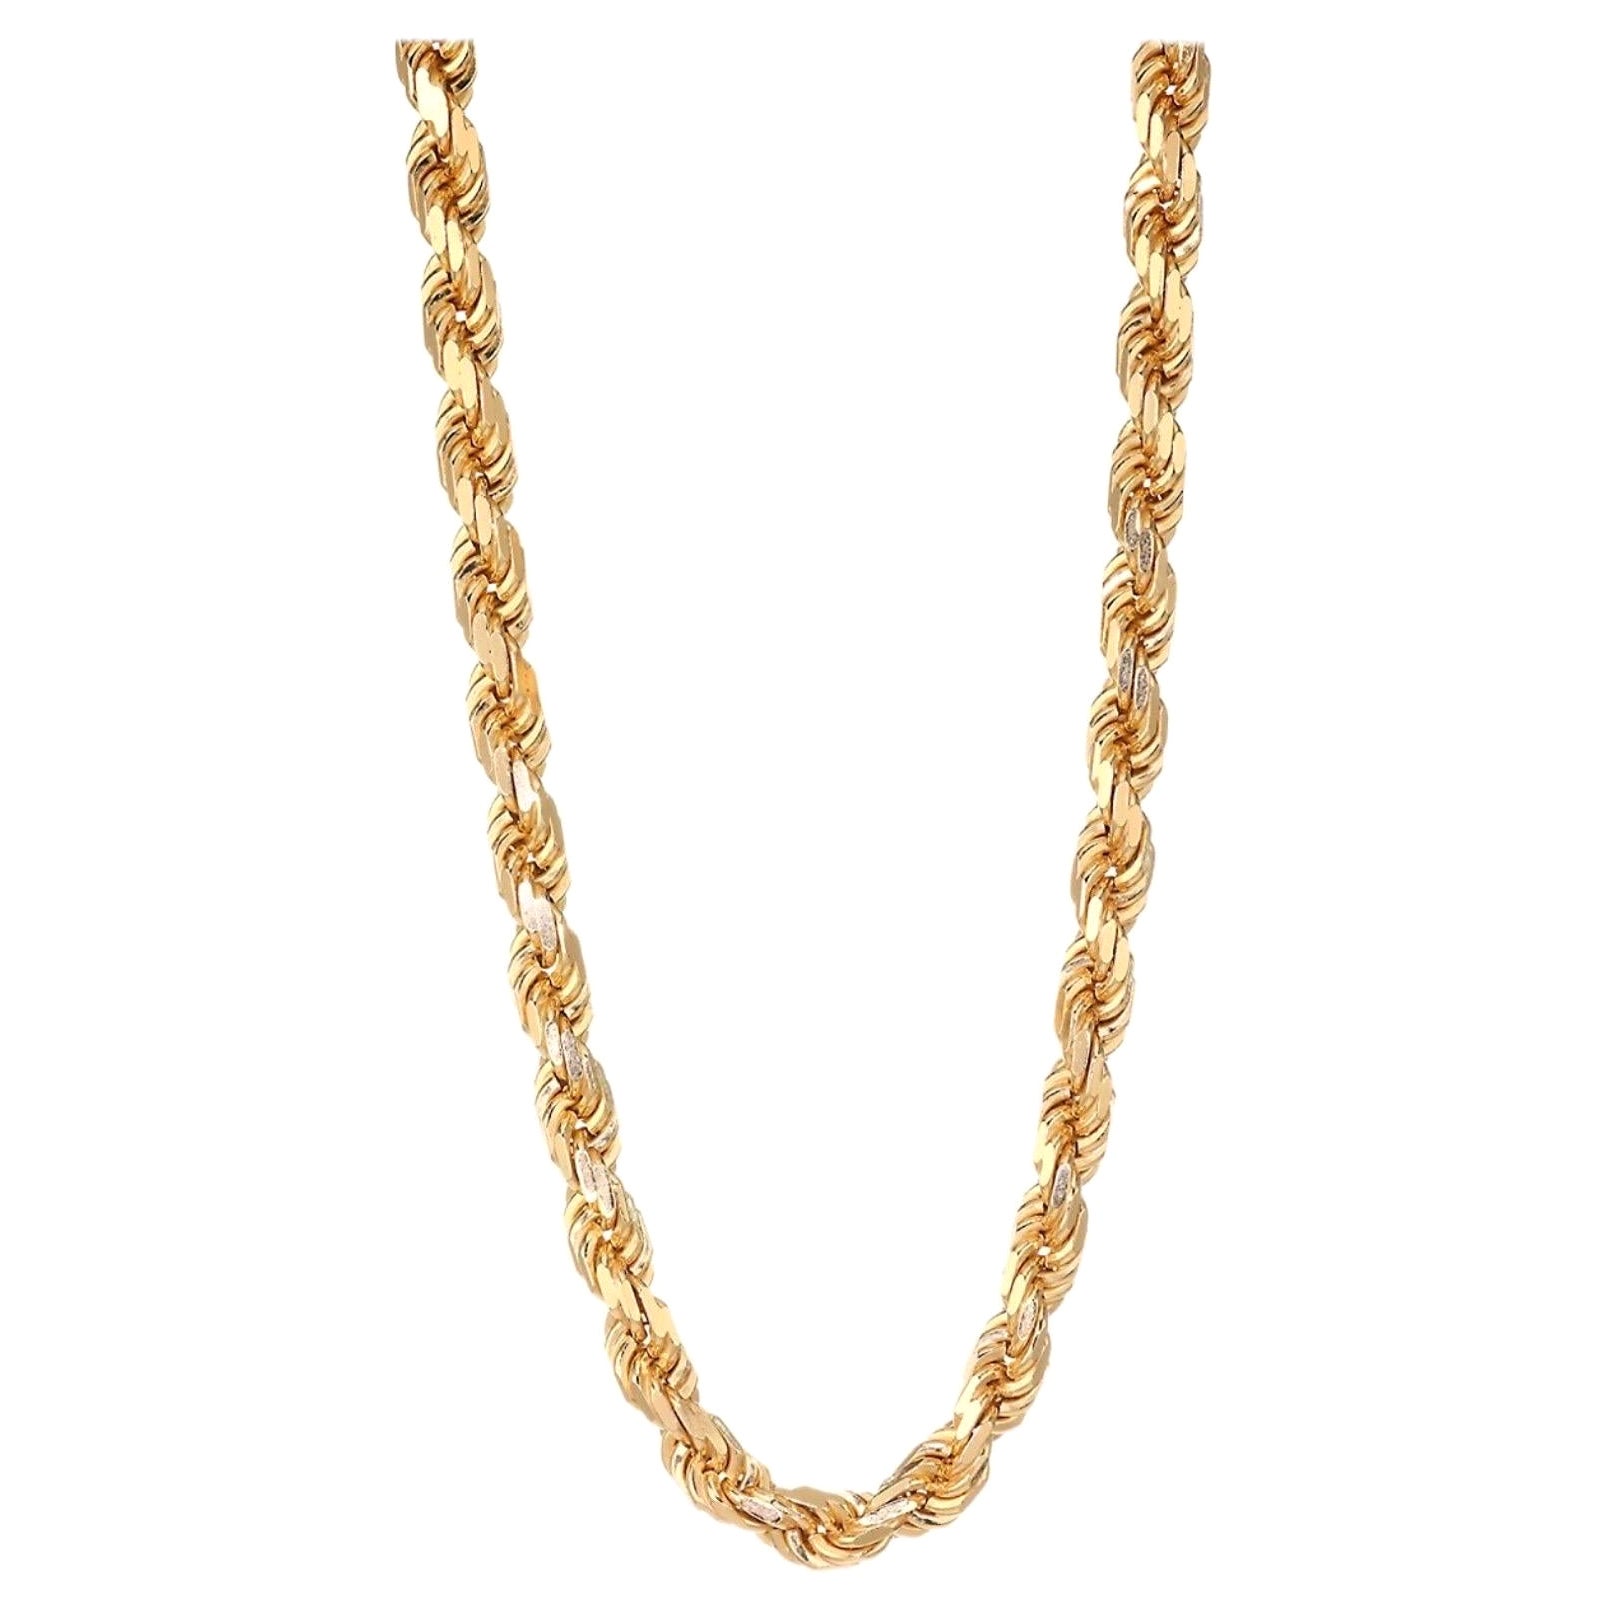 Vintage 14 Karat Yellow Gold 17 Gm, Rope Chain Necklace, 24 Inch long